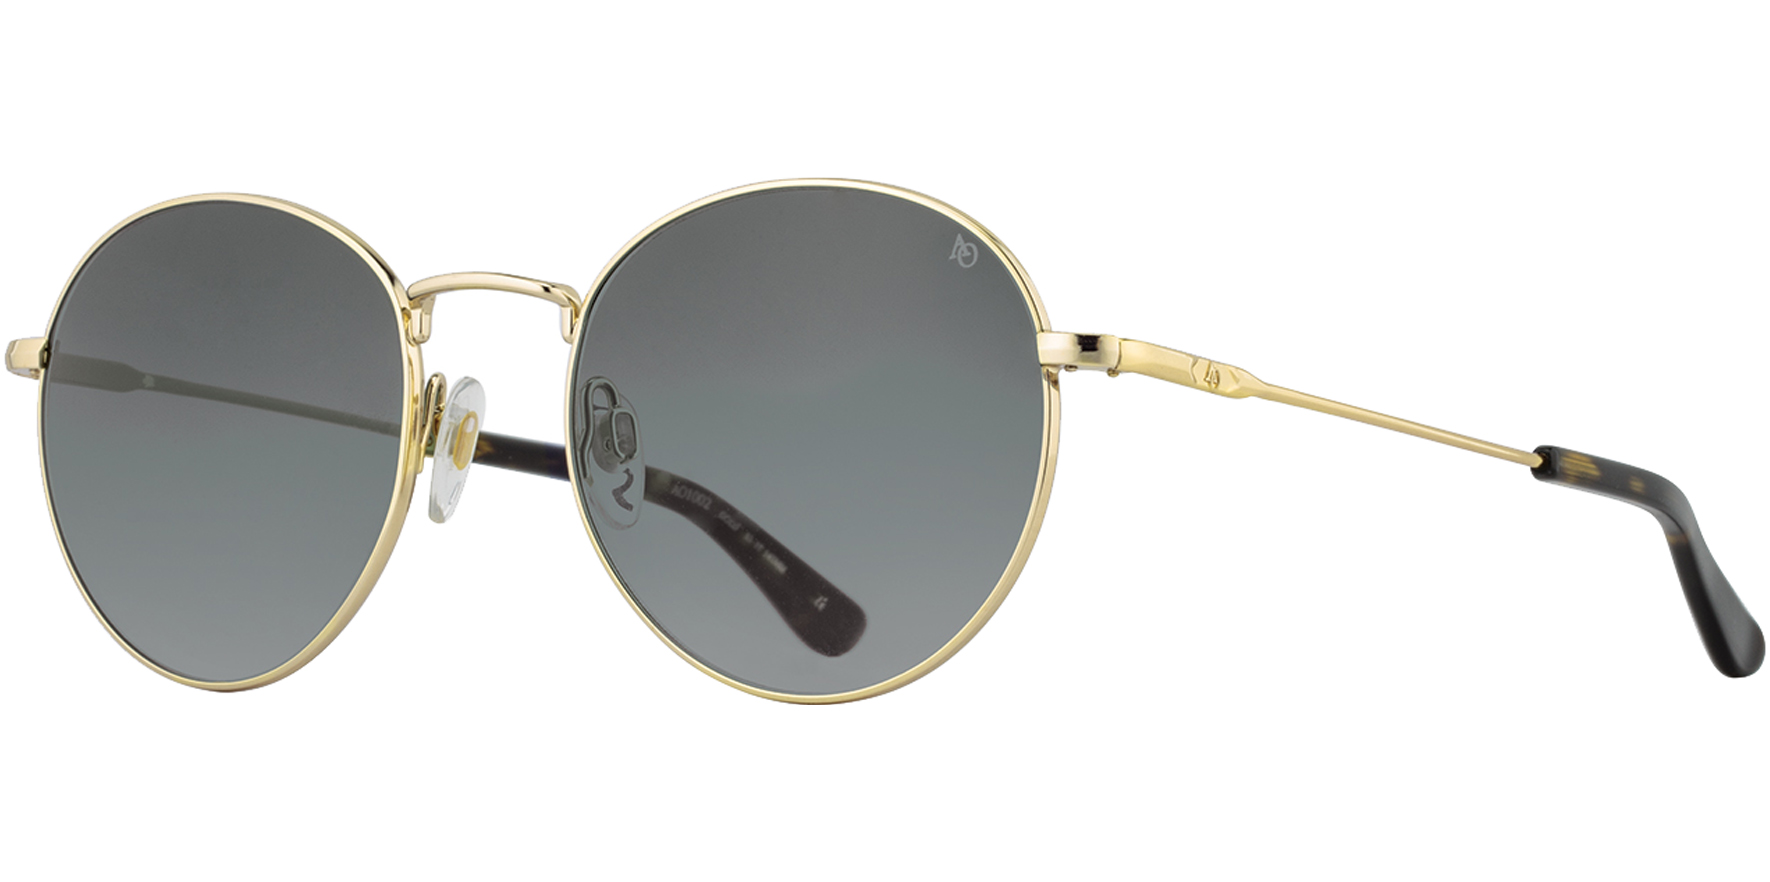 American Optical Gold-Tone Vintage Style Round